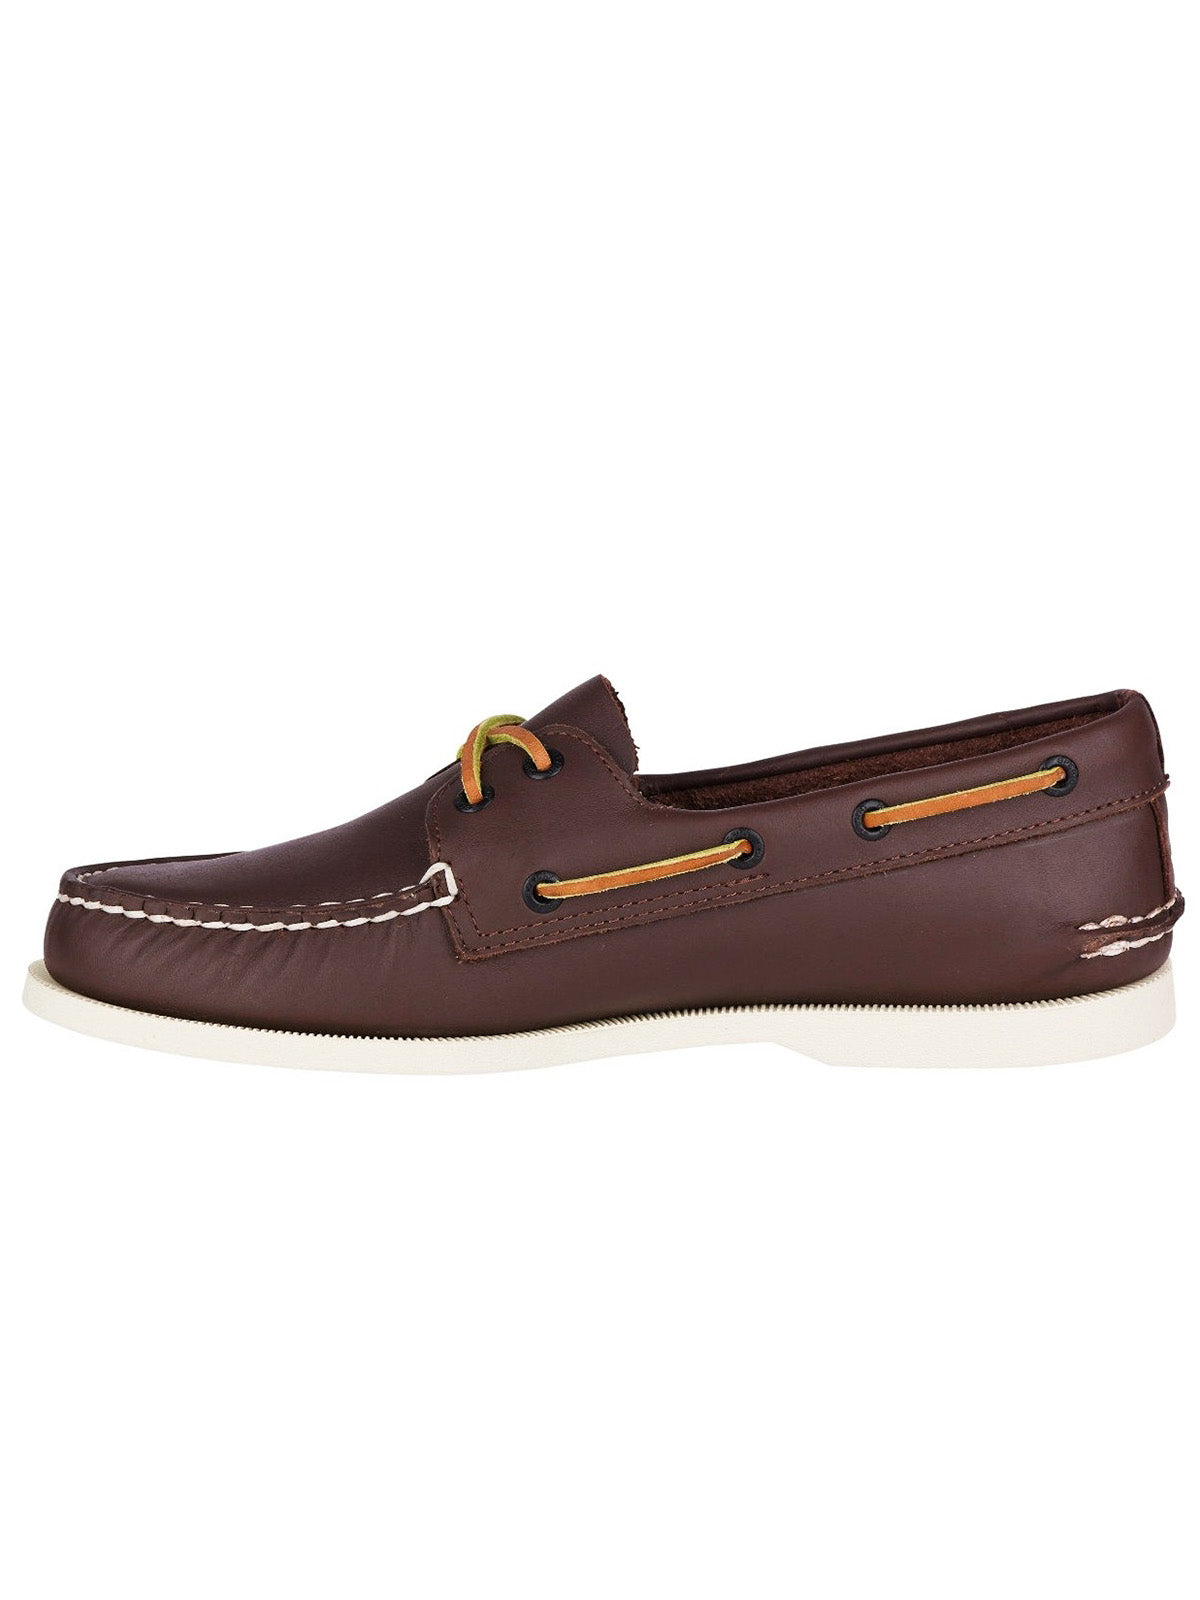 Sperry Mens Boat Shoes - Sperry Topsider Authentic Original 2-Eye Classic - Brown